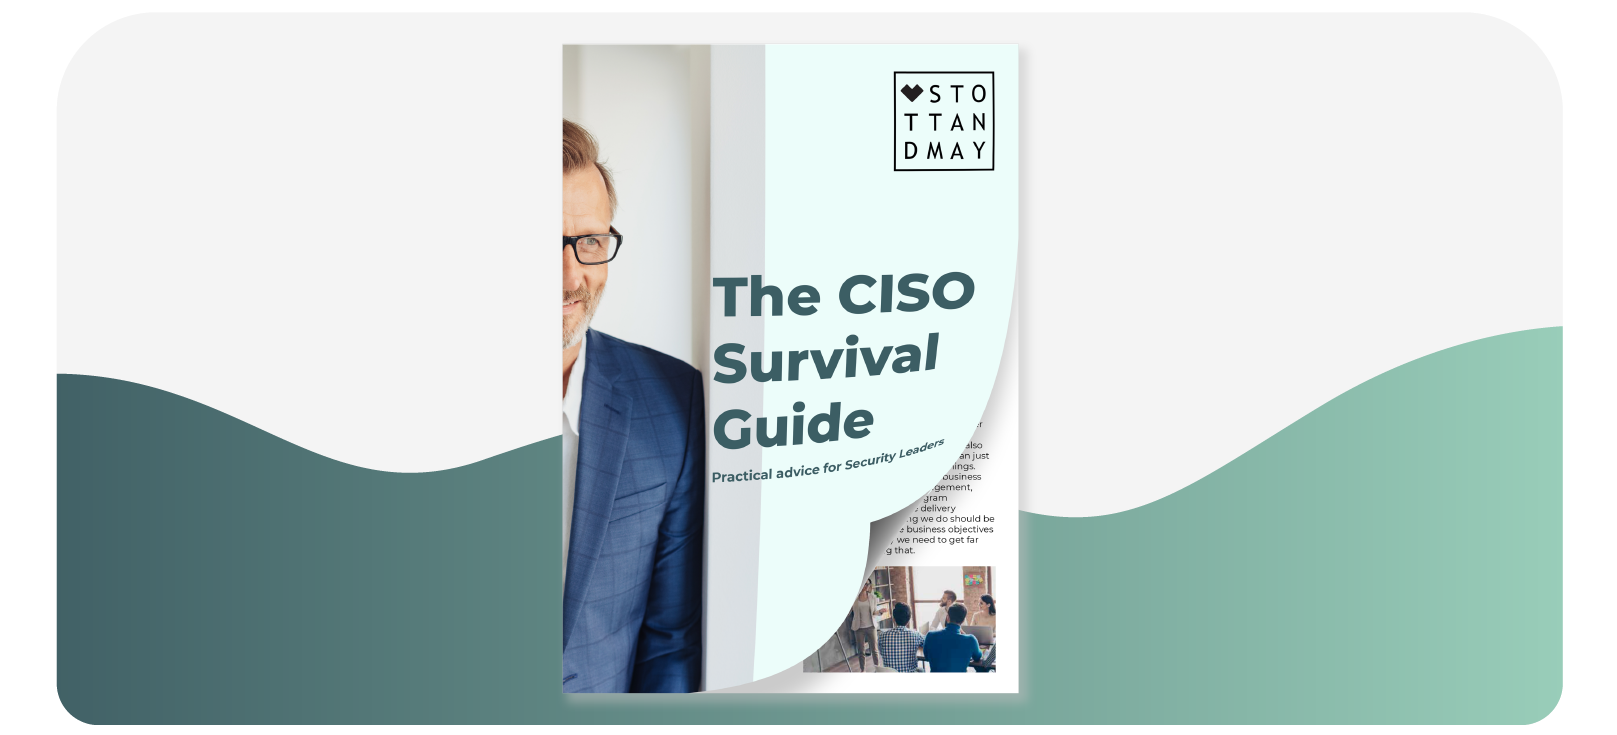 Stott and May CISO Survival Guide